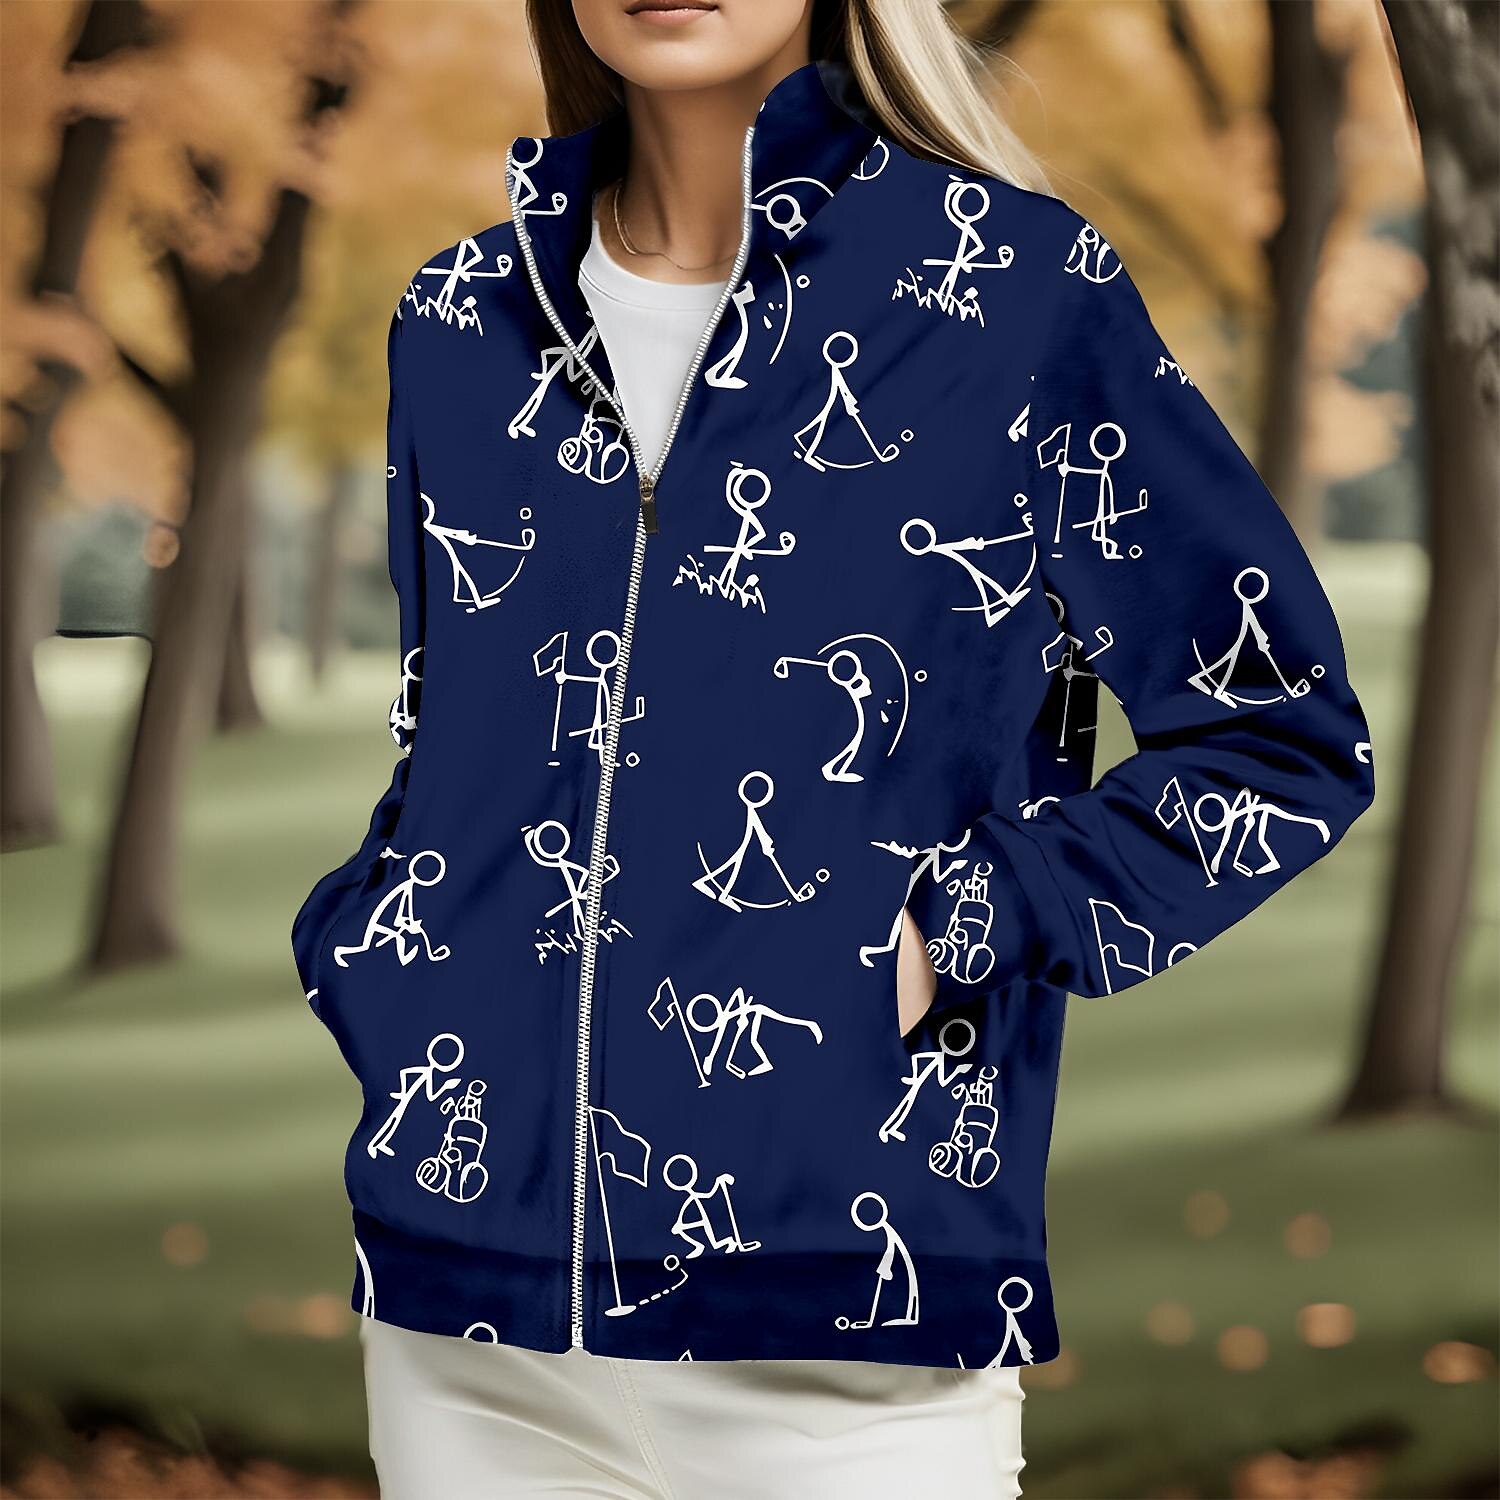 Women's Golf Hoodie Golf Pullover Golf Sweatshirt Thermal Warm Breathable Moisture Wicking Long Sleeve Golf Outerwear Top Regular Fit Side Pockets Full Zip Funny Printed Spring Autumn Tennis Golf 2023 - € 27.99 –P6